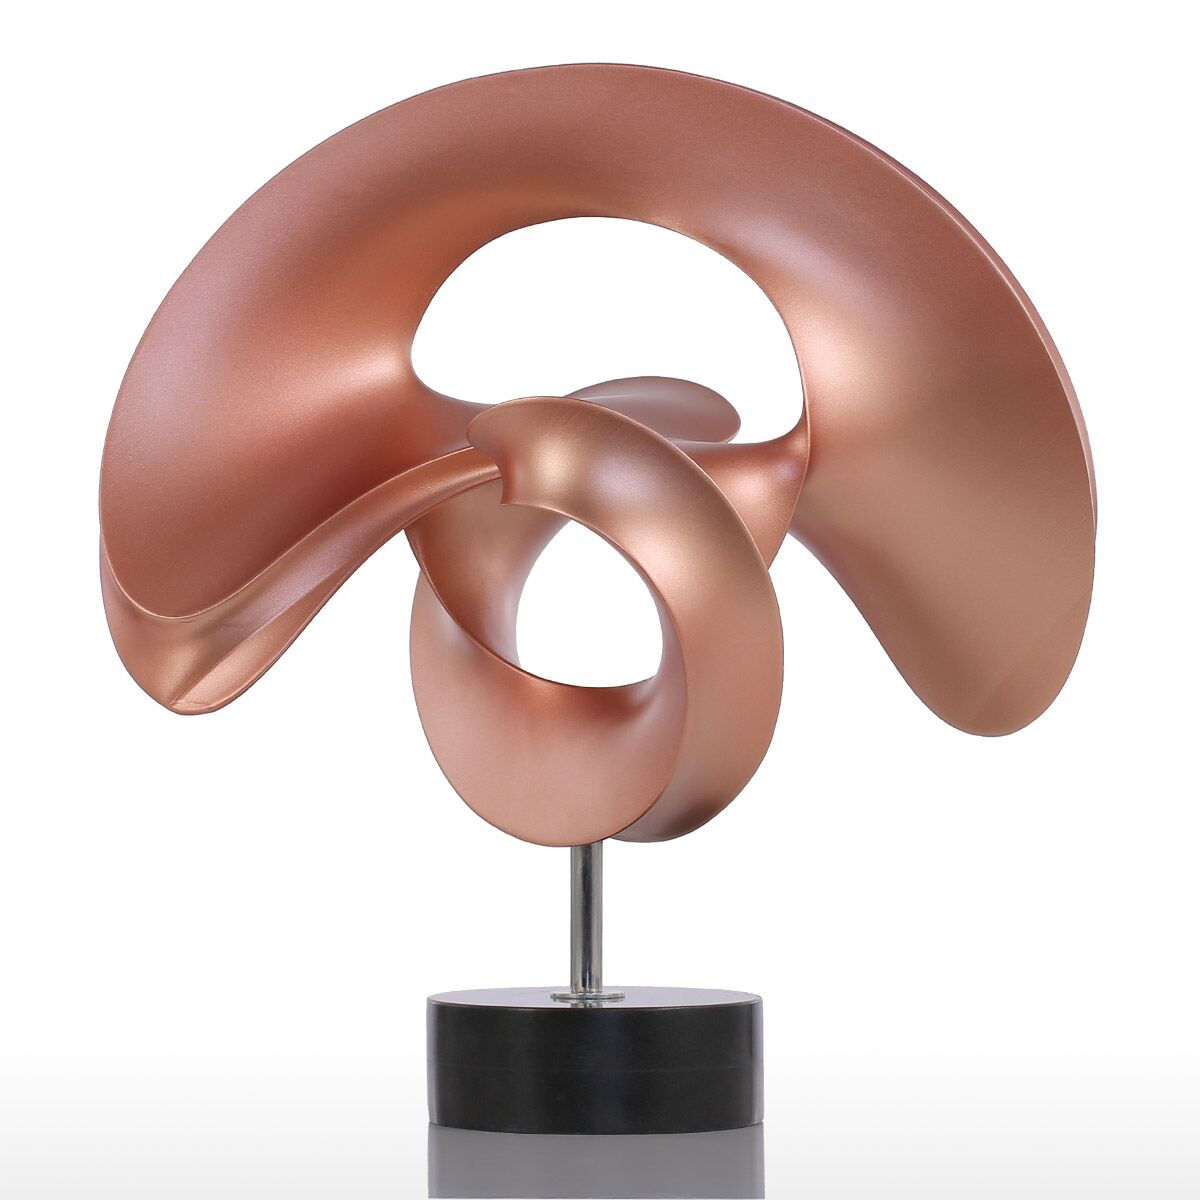 Ao74s Nbe Spring Abstract Resin Bronze Sculpture - 11.4 X 7.1 X 12.6 In.